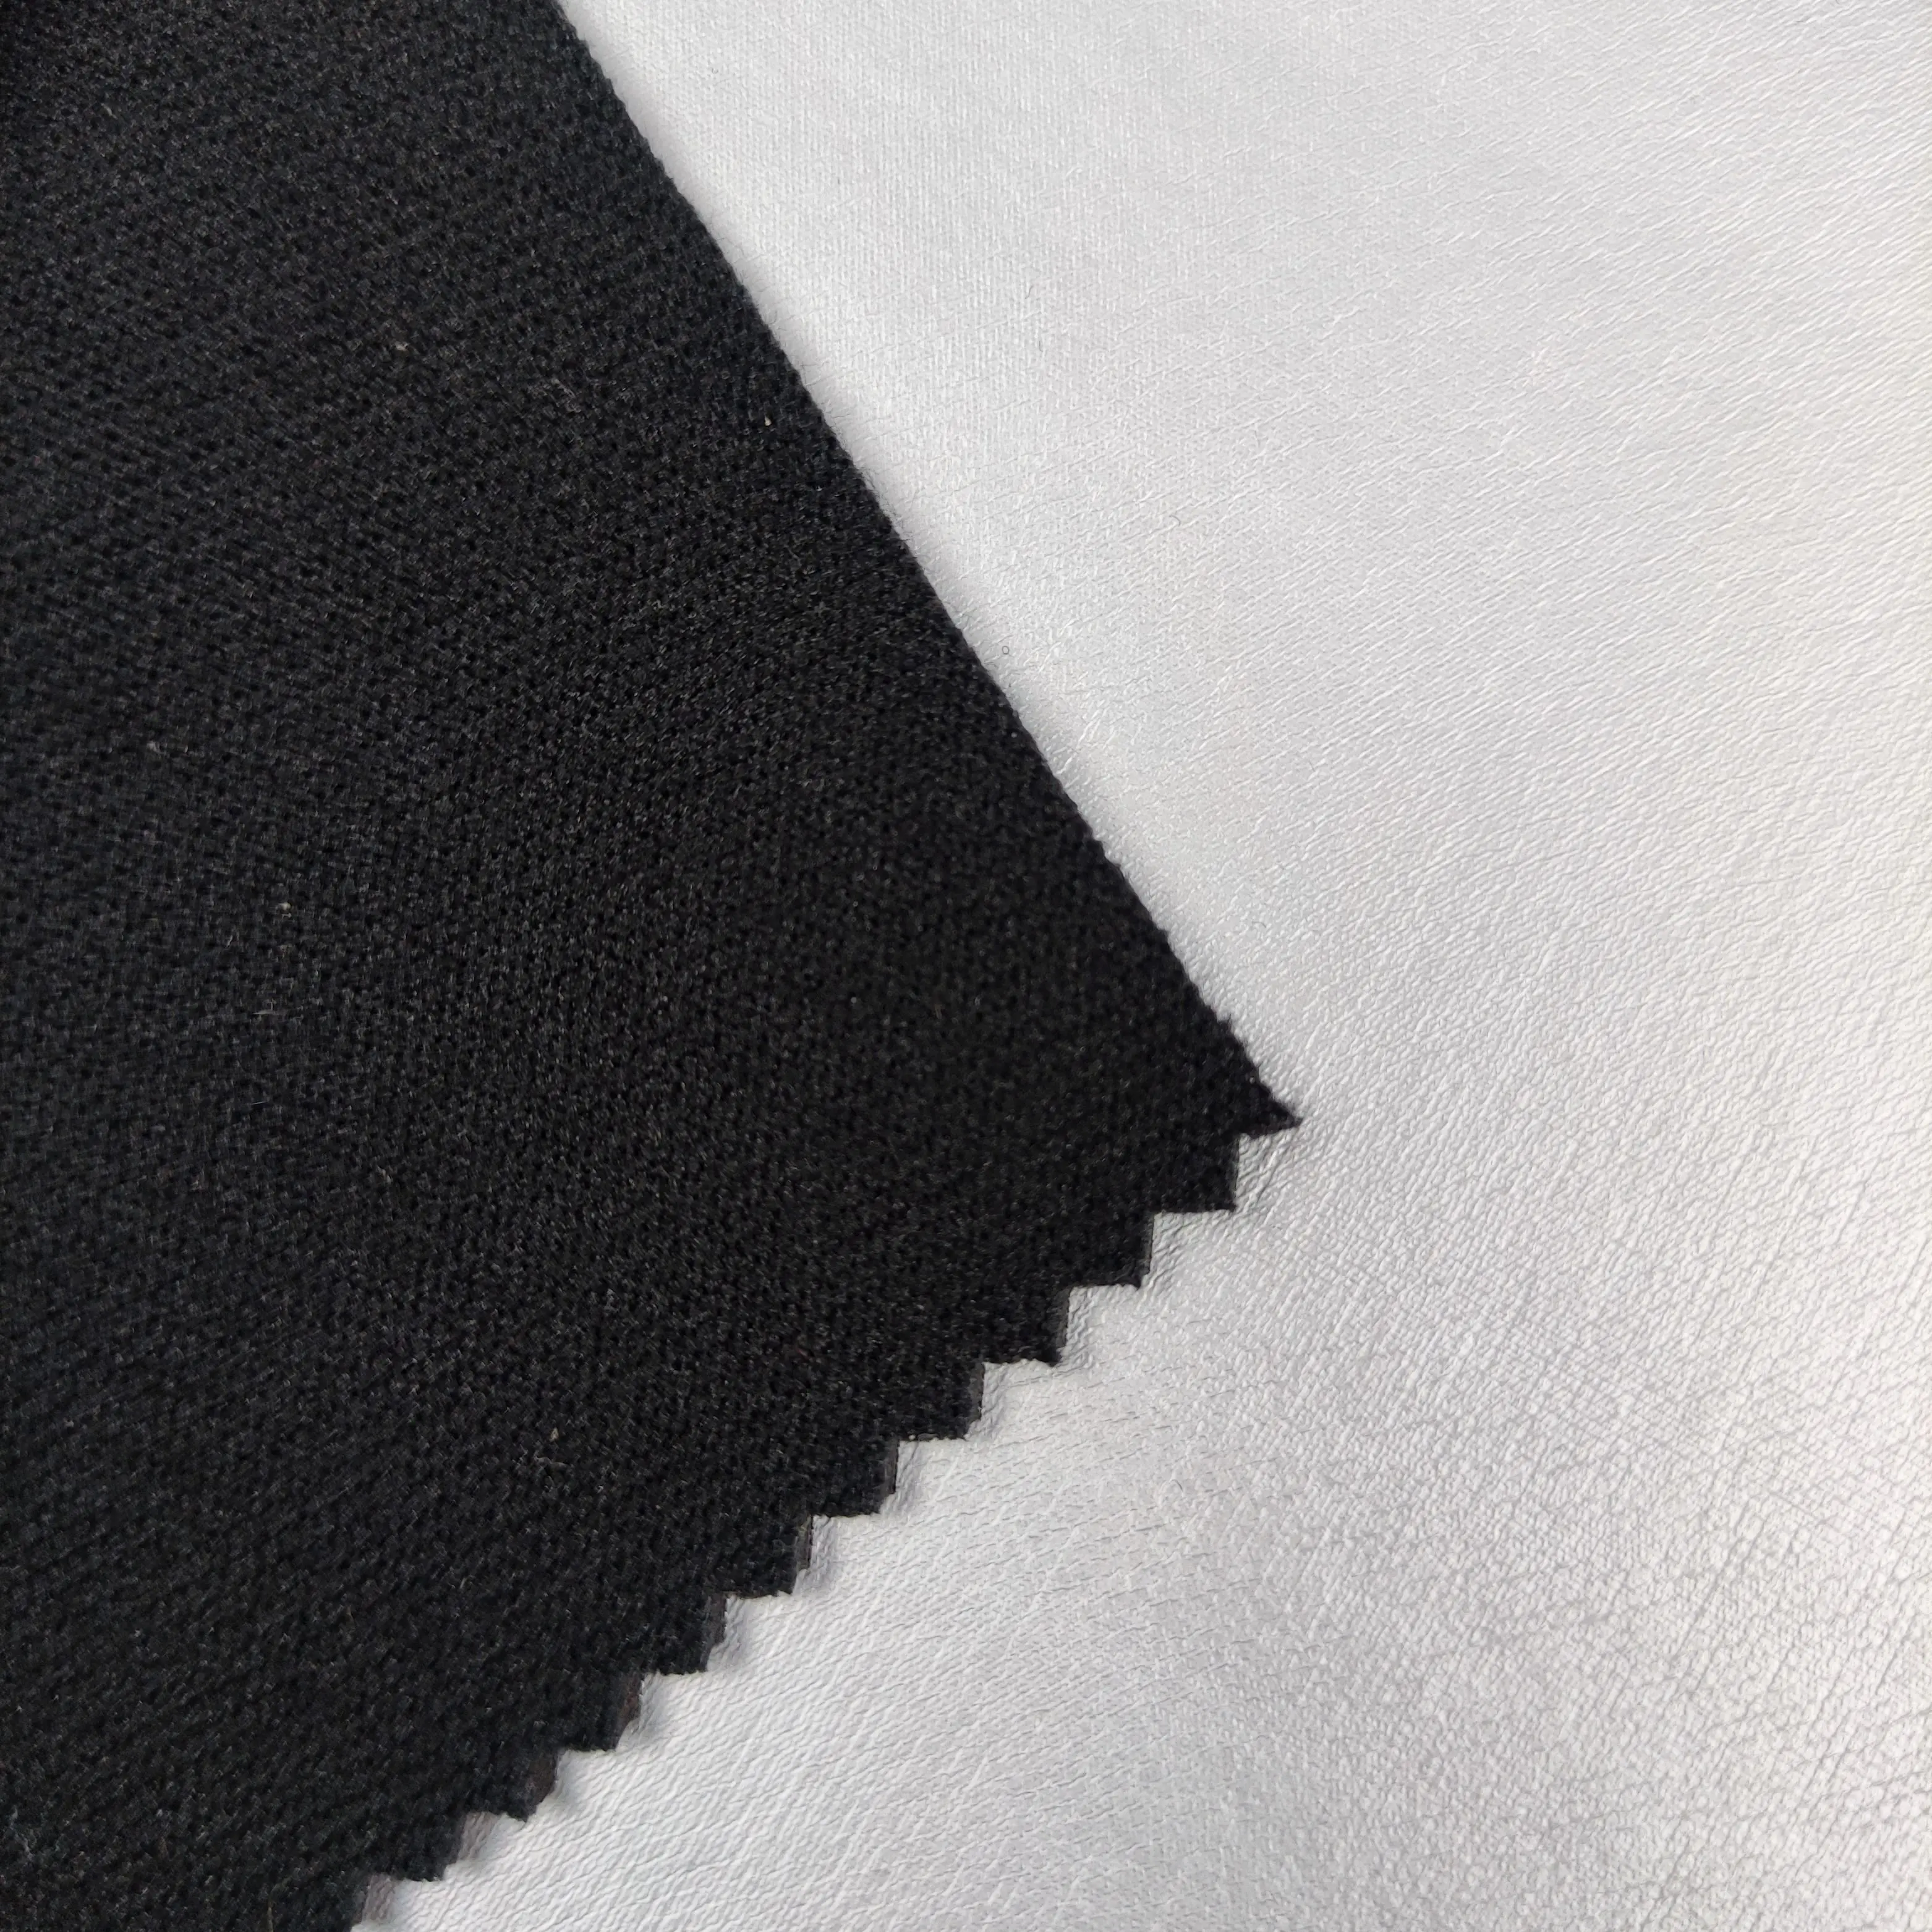 UOO Factory 3mm Polyester VS Towel Fabric Terry Fabric with Shiny Silver Coating SBR Neoprene Fabric for Slimming Pants Belt